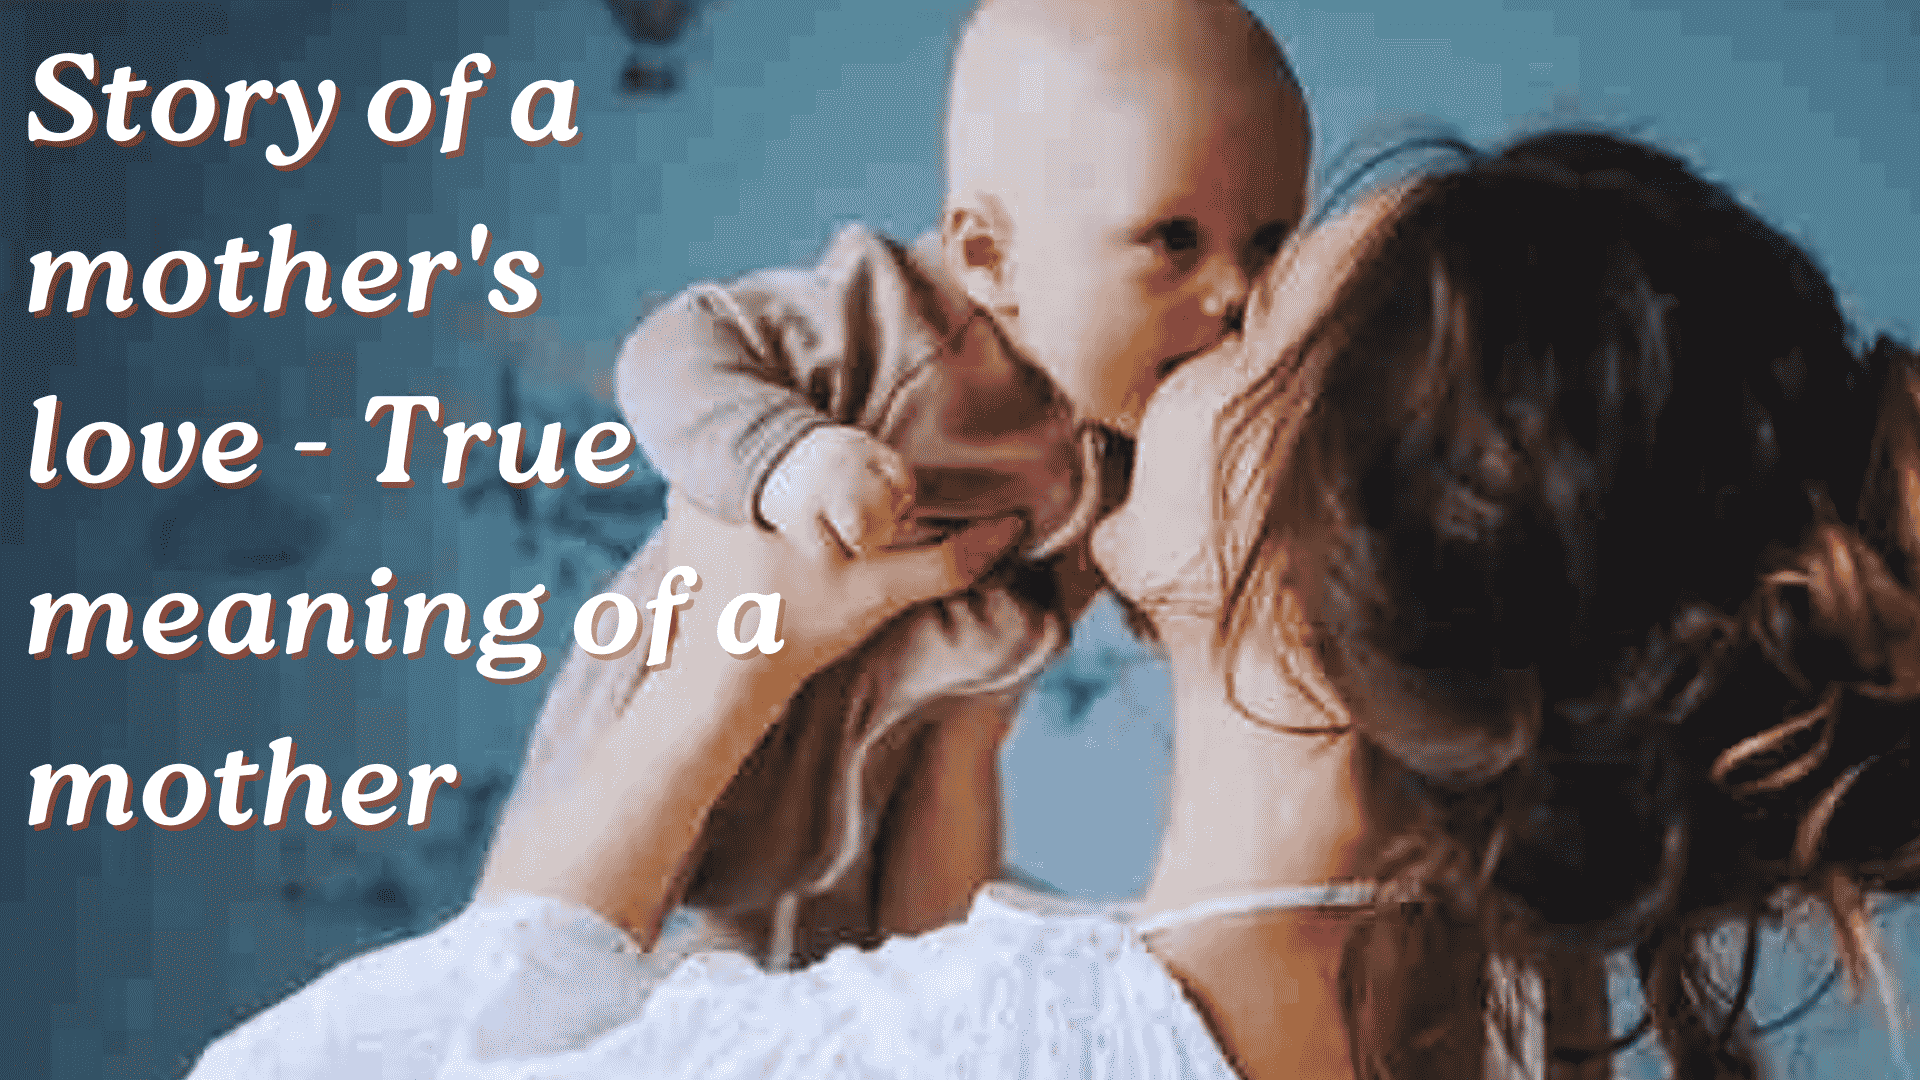 Story of a mother's love - True meaning of a mother